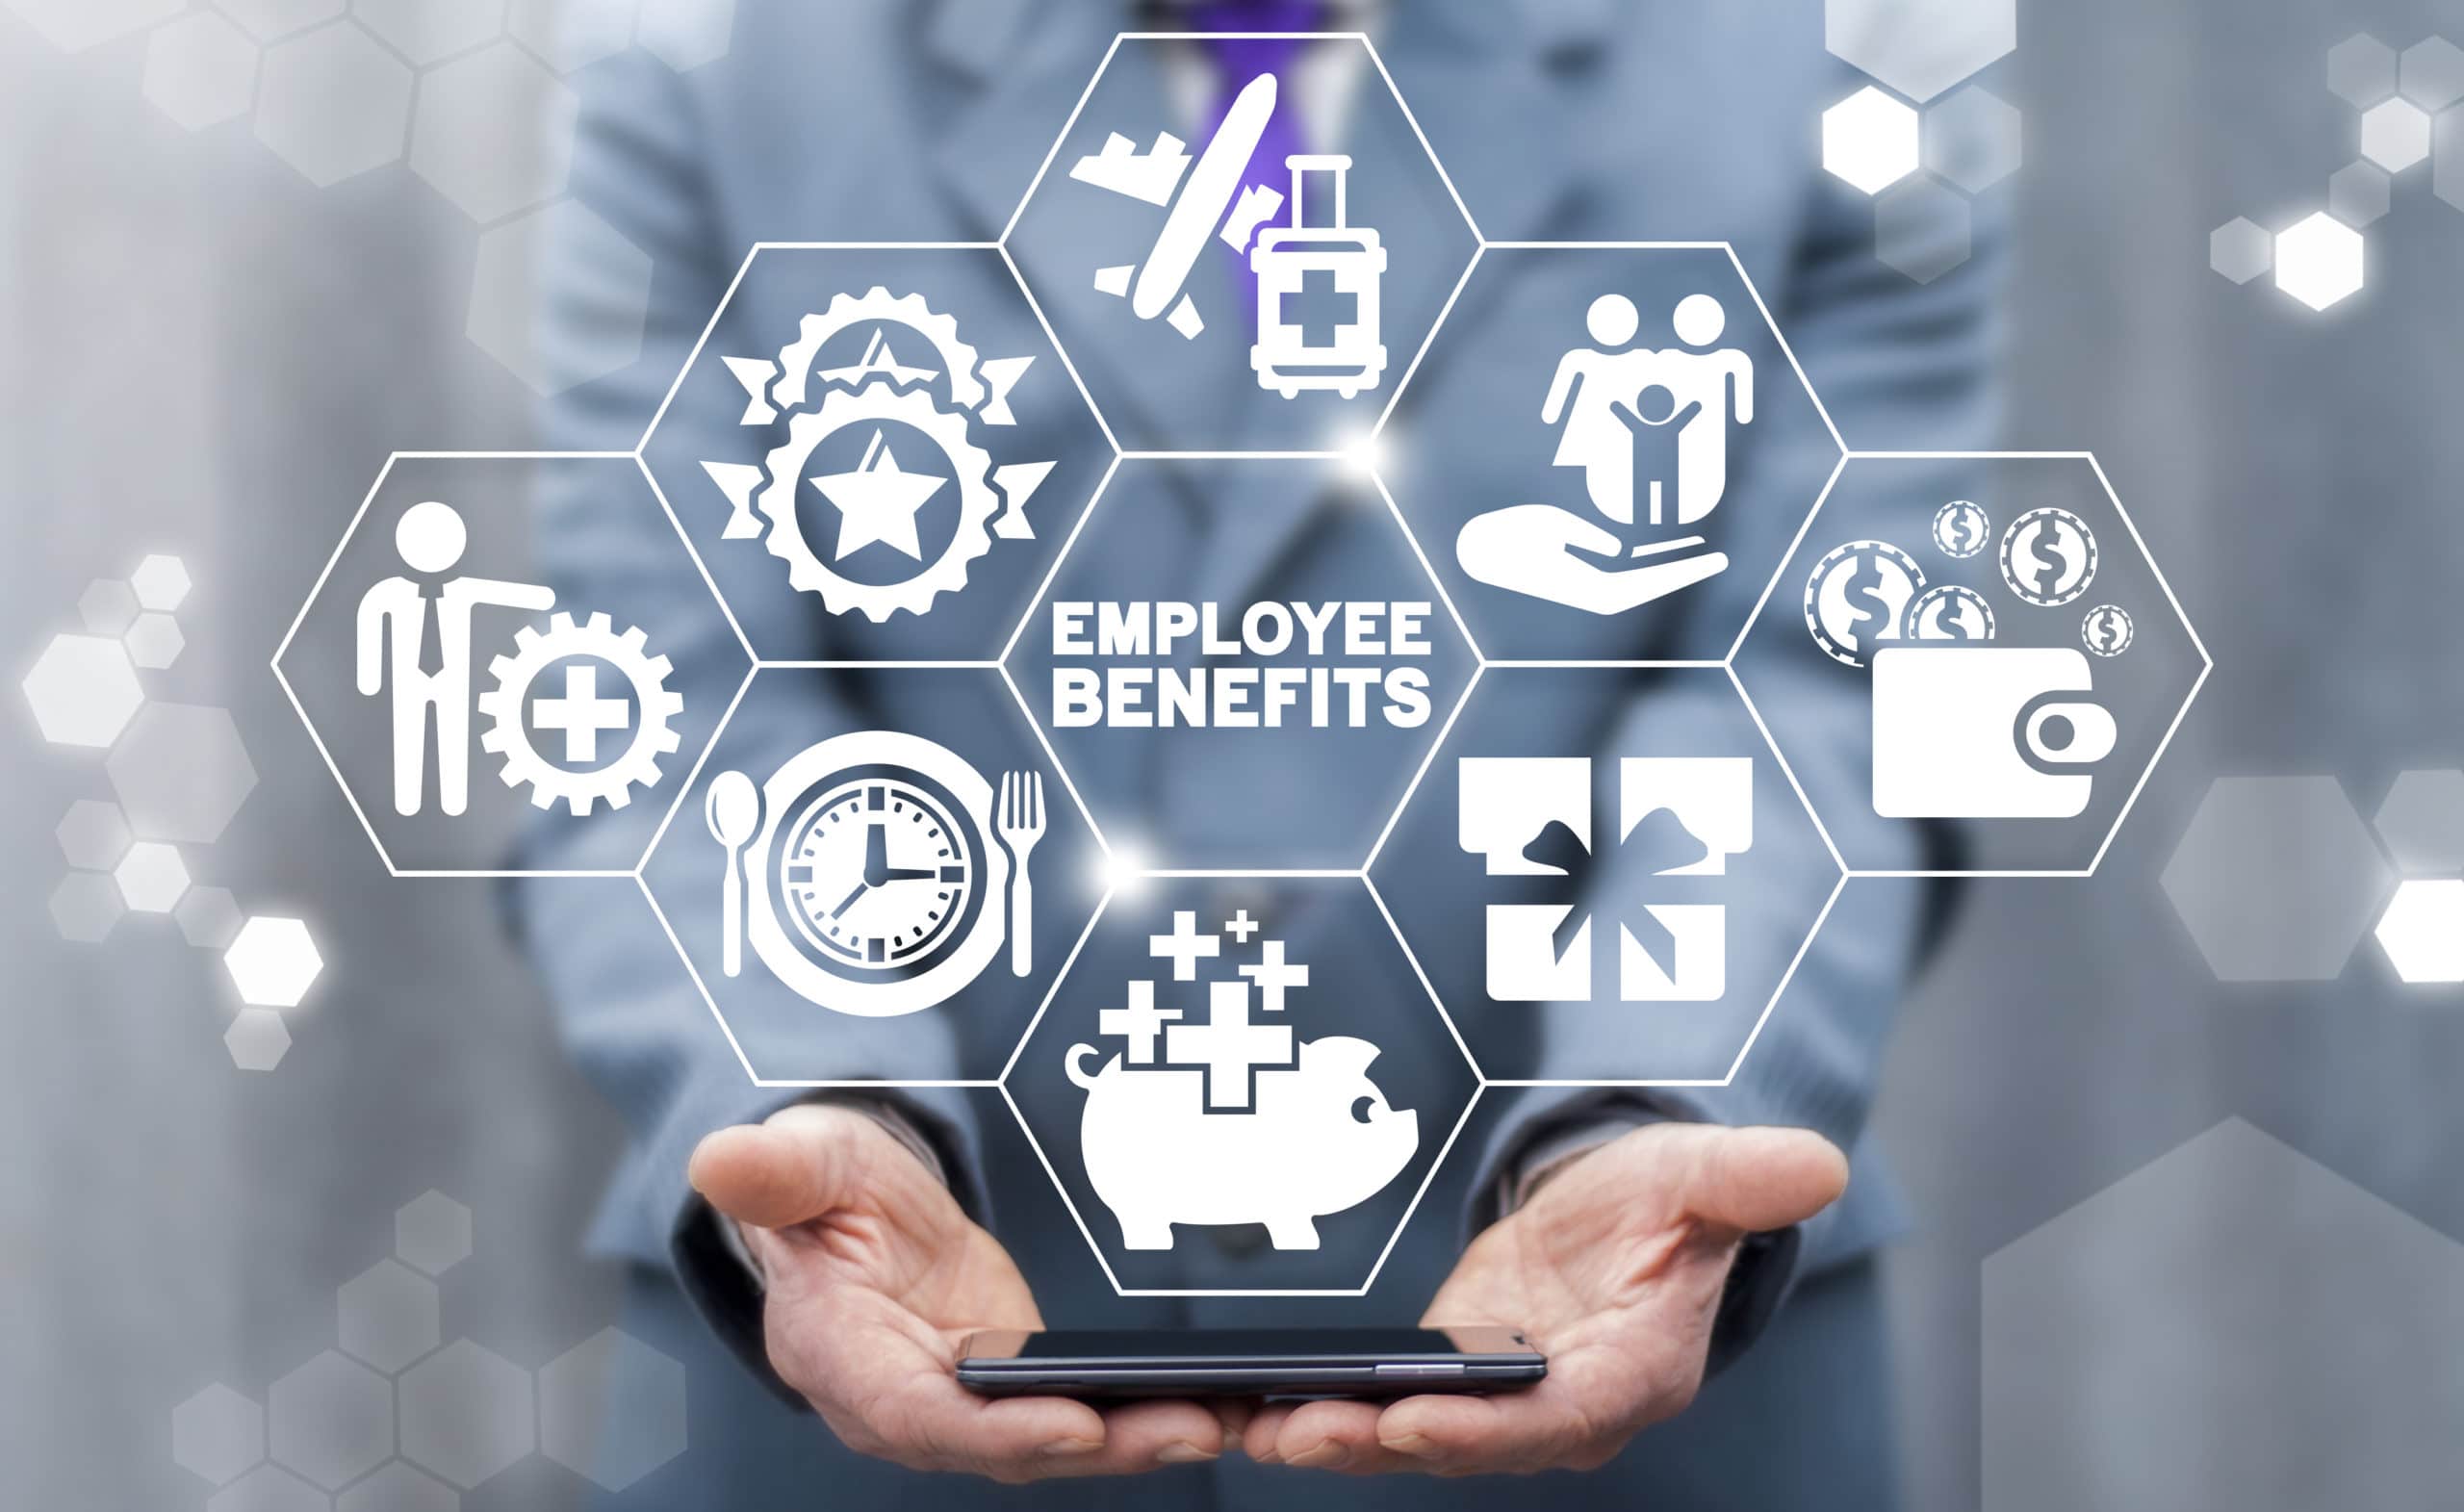 A graphic showing a grid of employee benefits